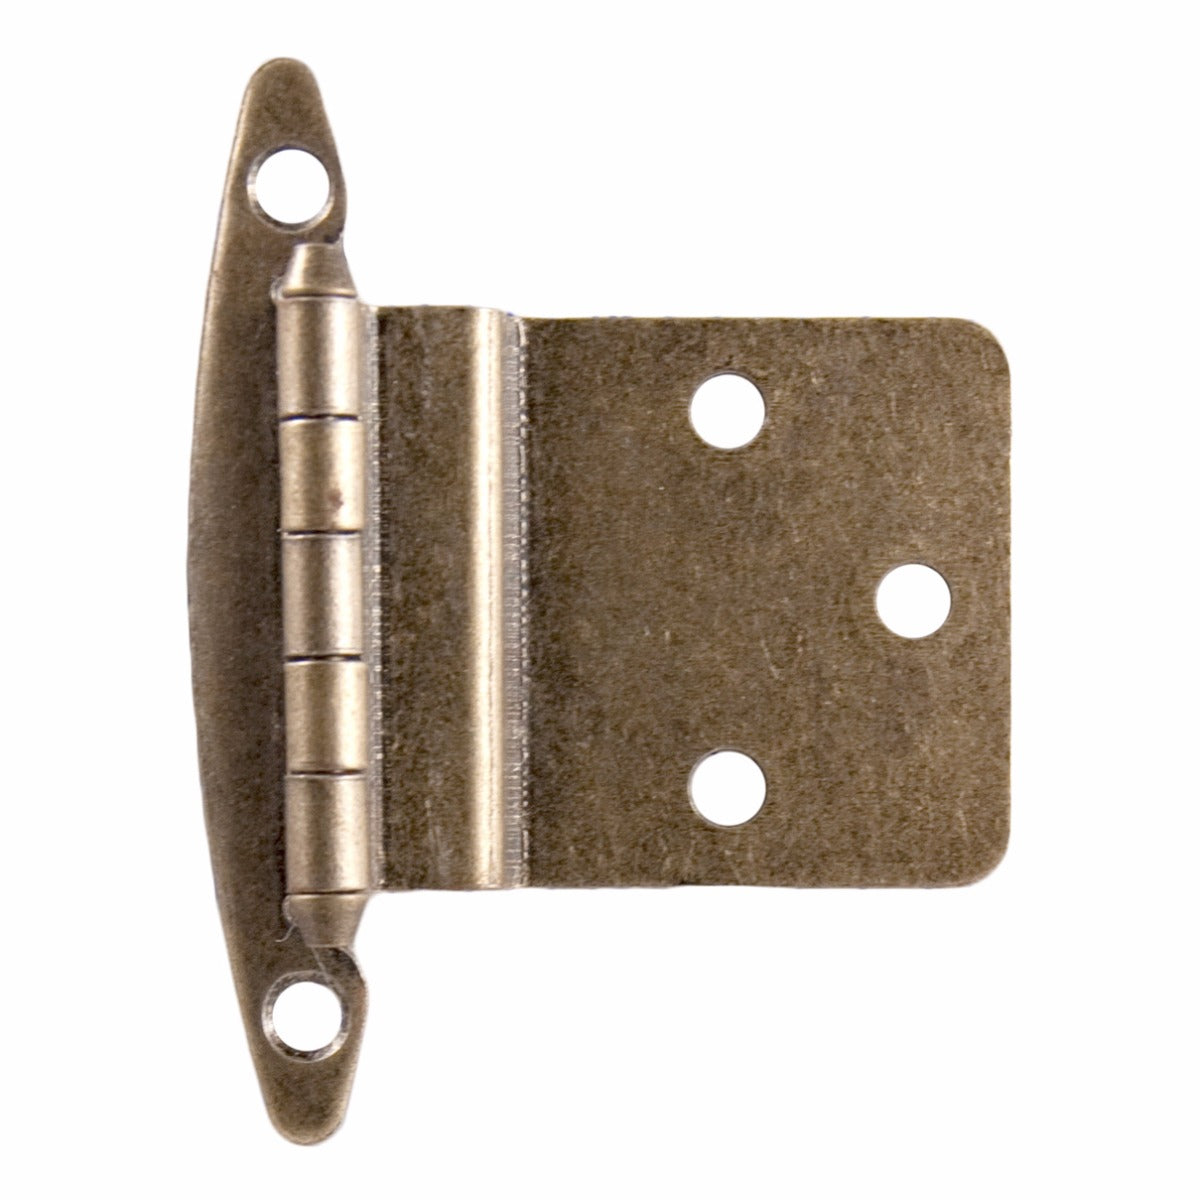 3/4" Partial Inset Cabinet Hinge